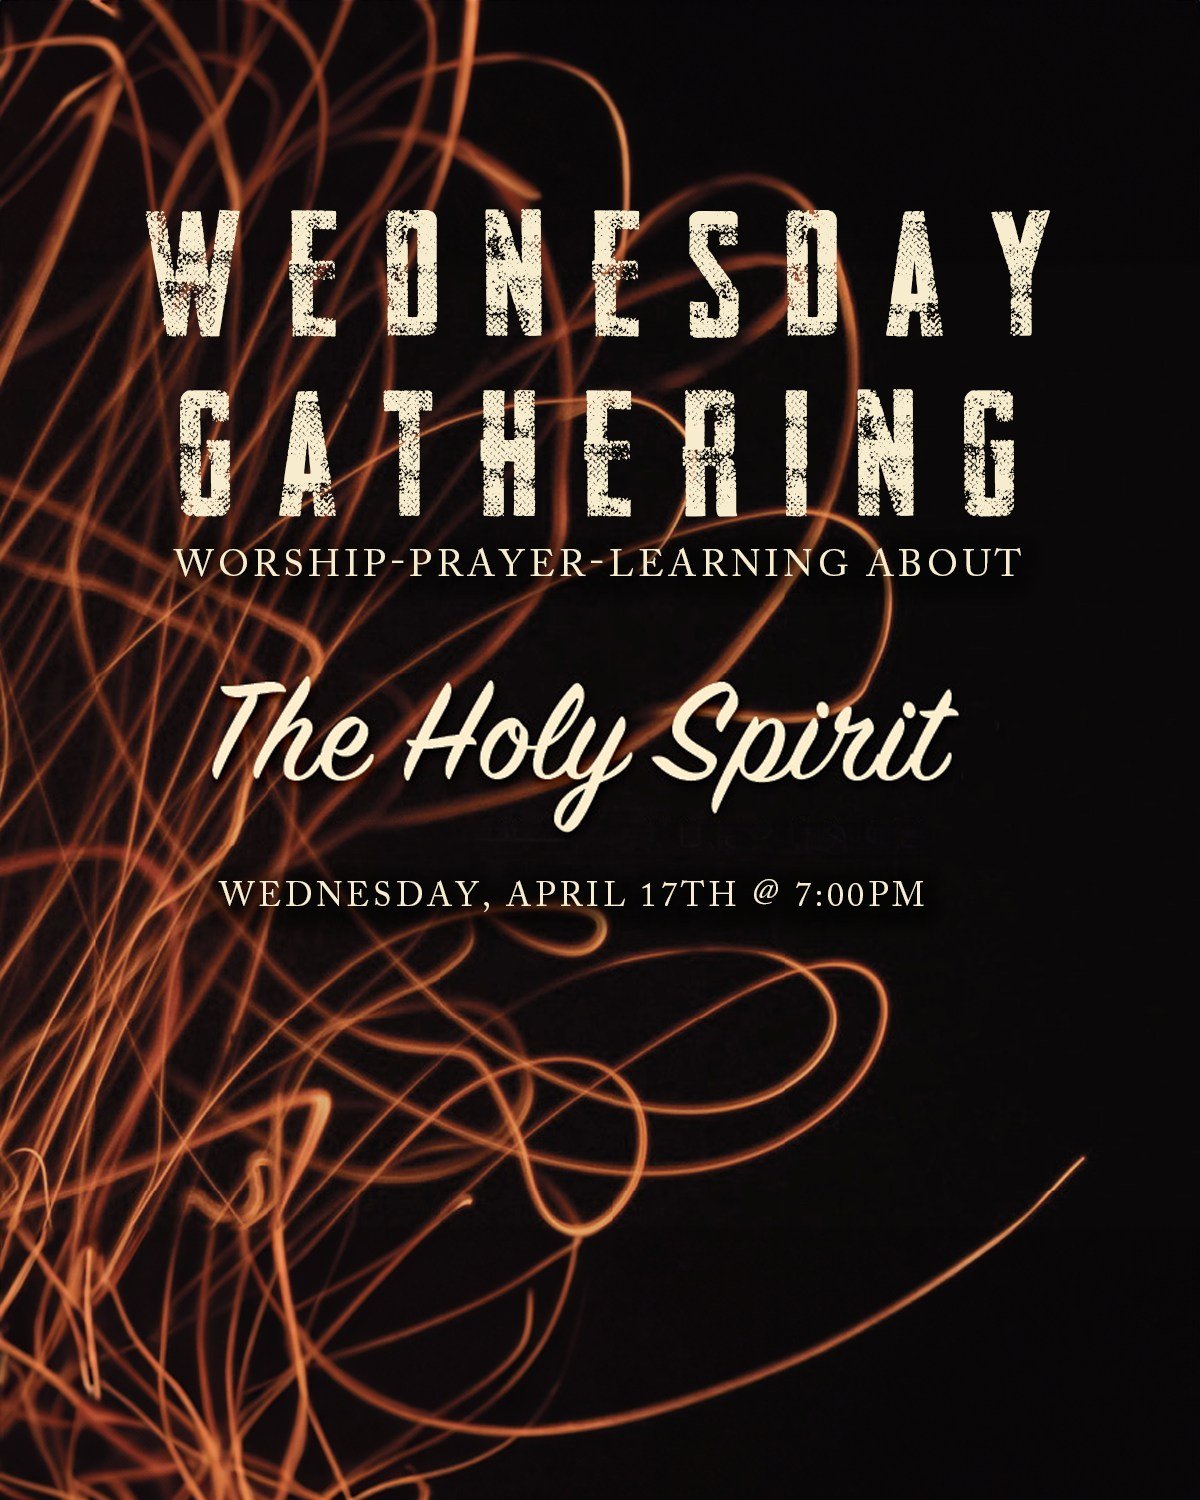 Don't miss out on our Wednesday Gathering tomorrow, April 17th, at 7:00 PM! 
It's going to be an incredible evening filled with worship, prayer, and an enlightening message from Pastor Leaf about the Holy Spirit! 
Dive deeper into God's presence and 